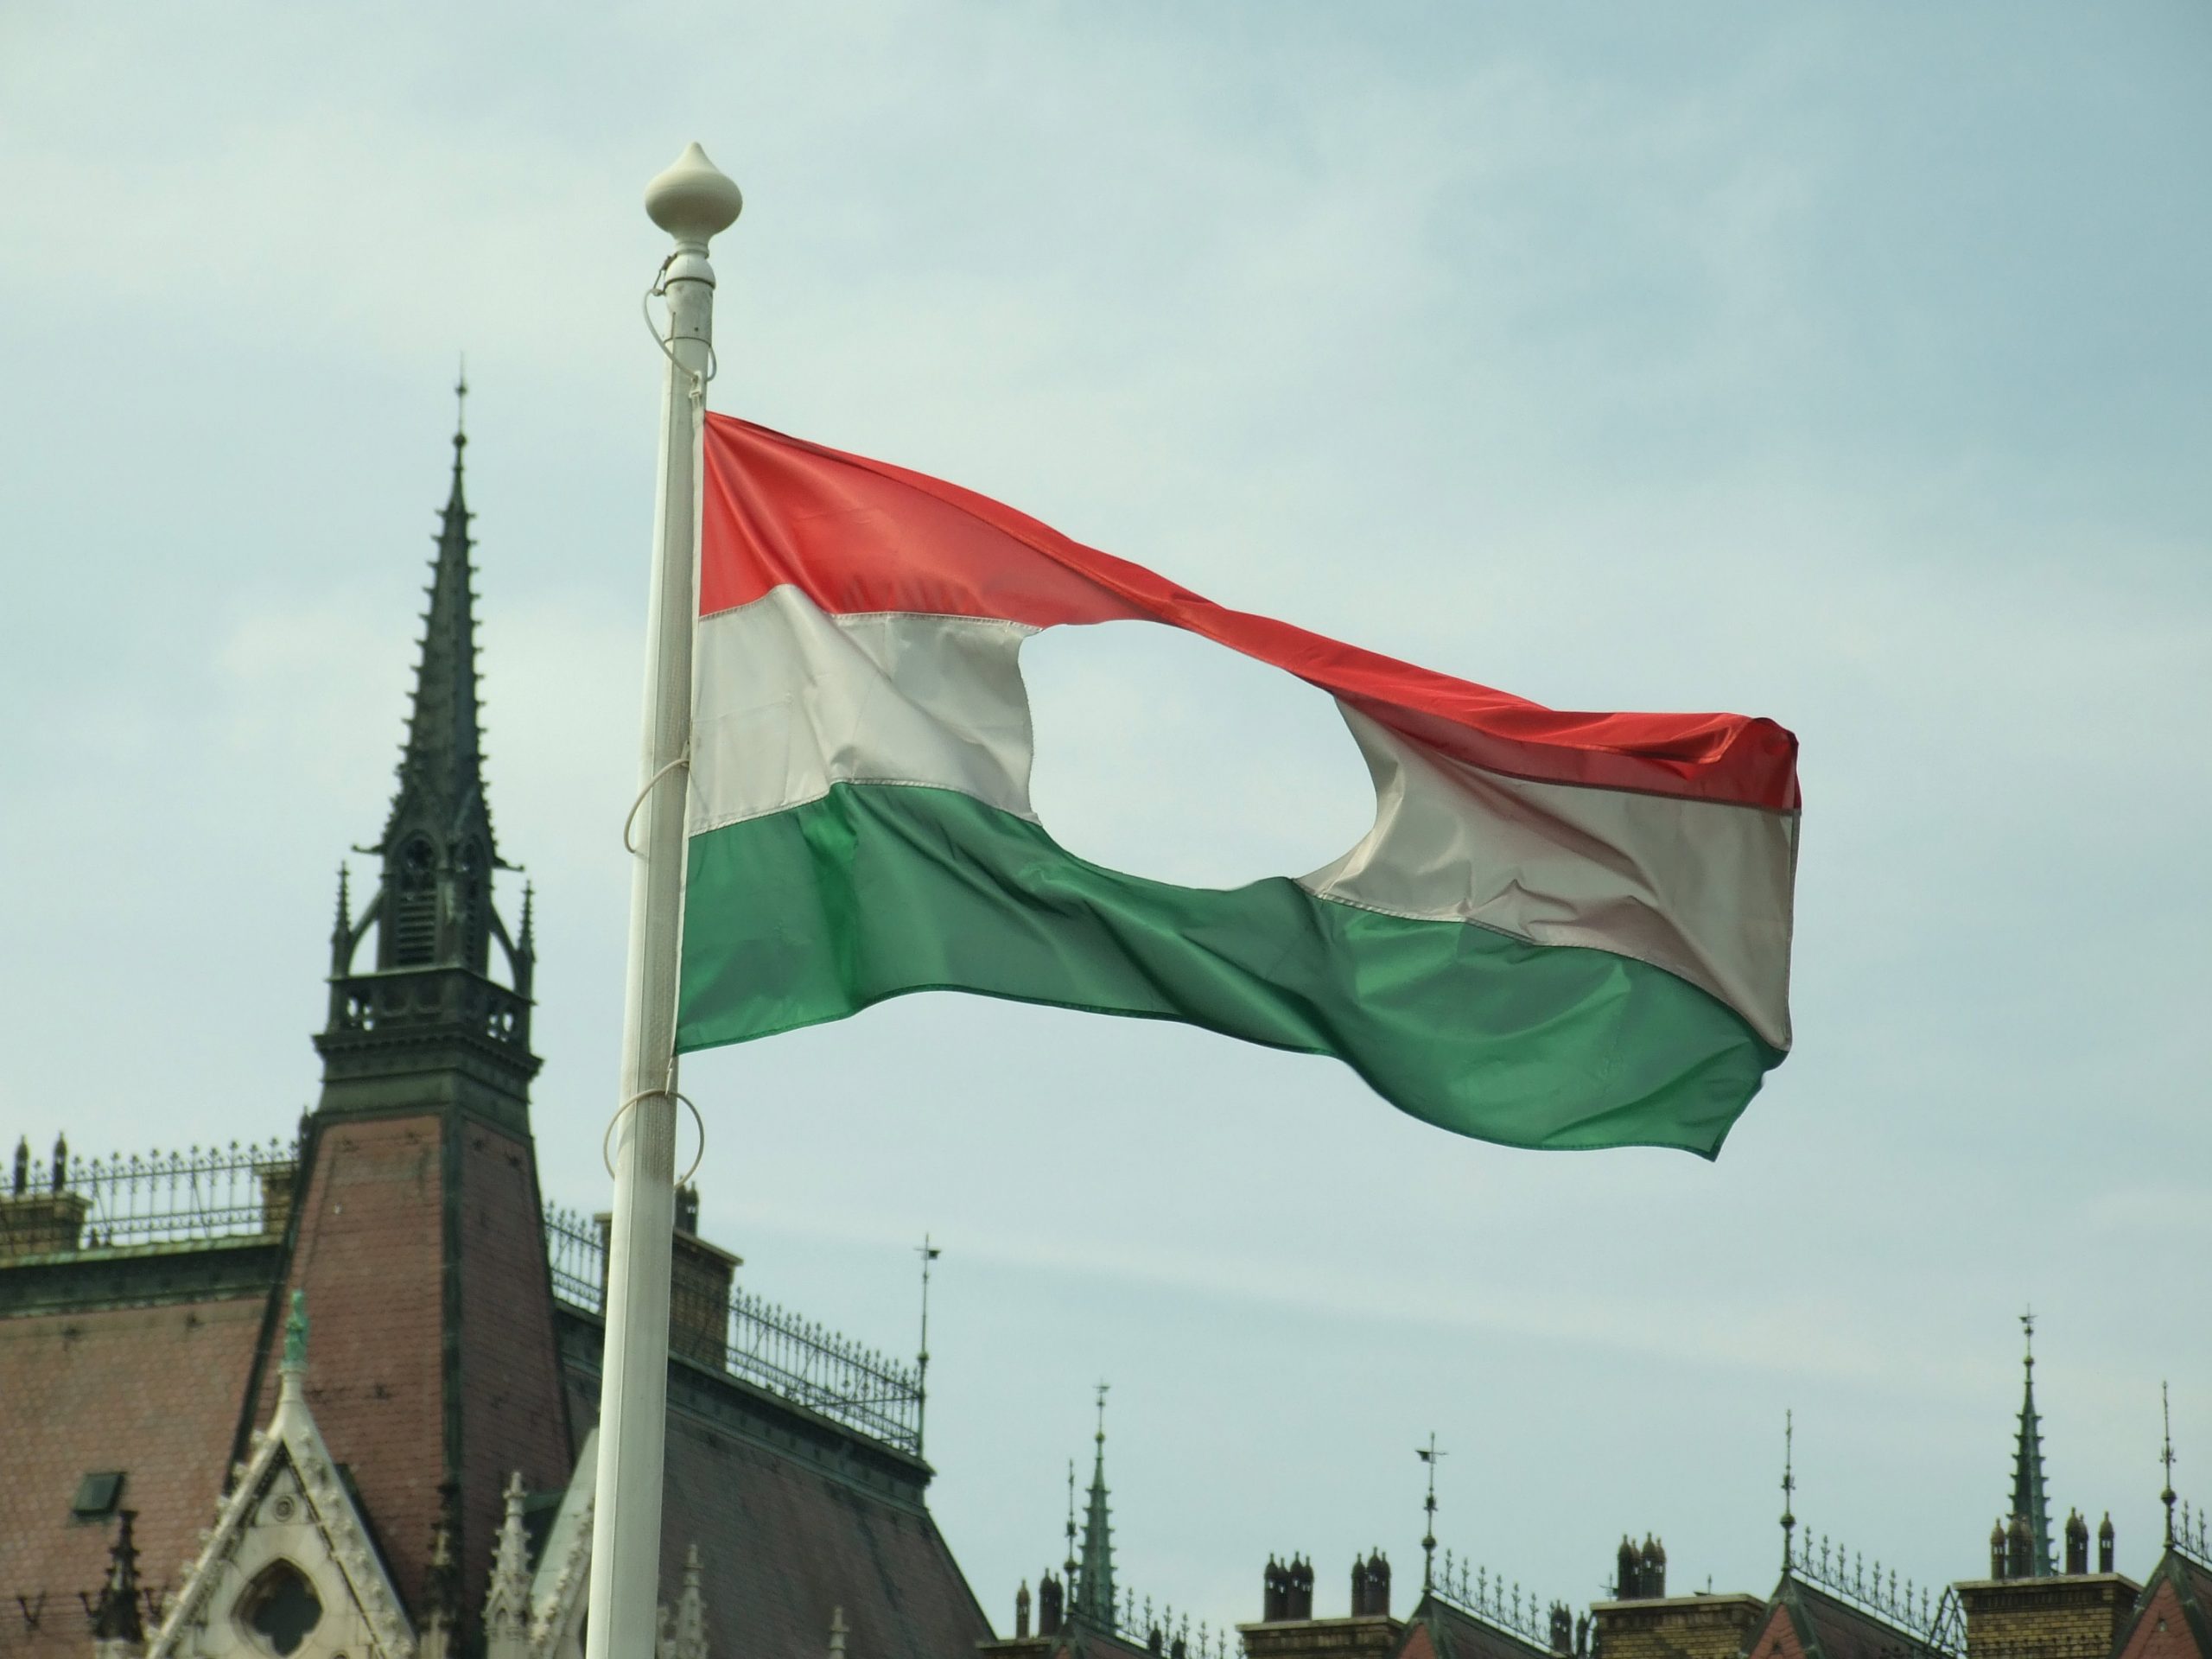 The Hungarian rebels cut the Communist emblem out of the middle of the Hungarian flag, leaving a torn a three color flag as the symbol of the revolt